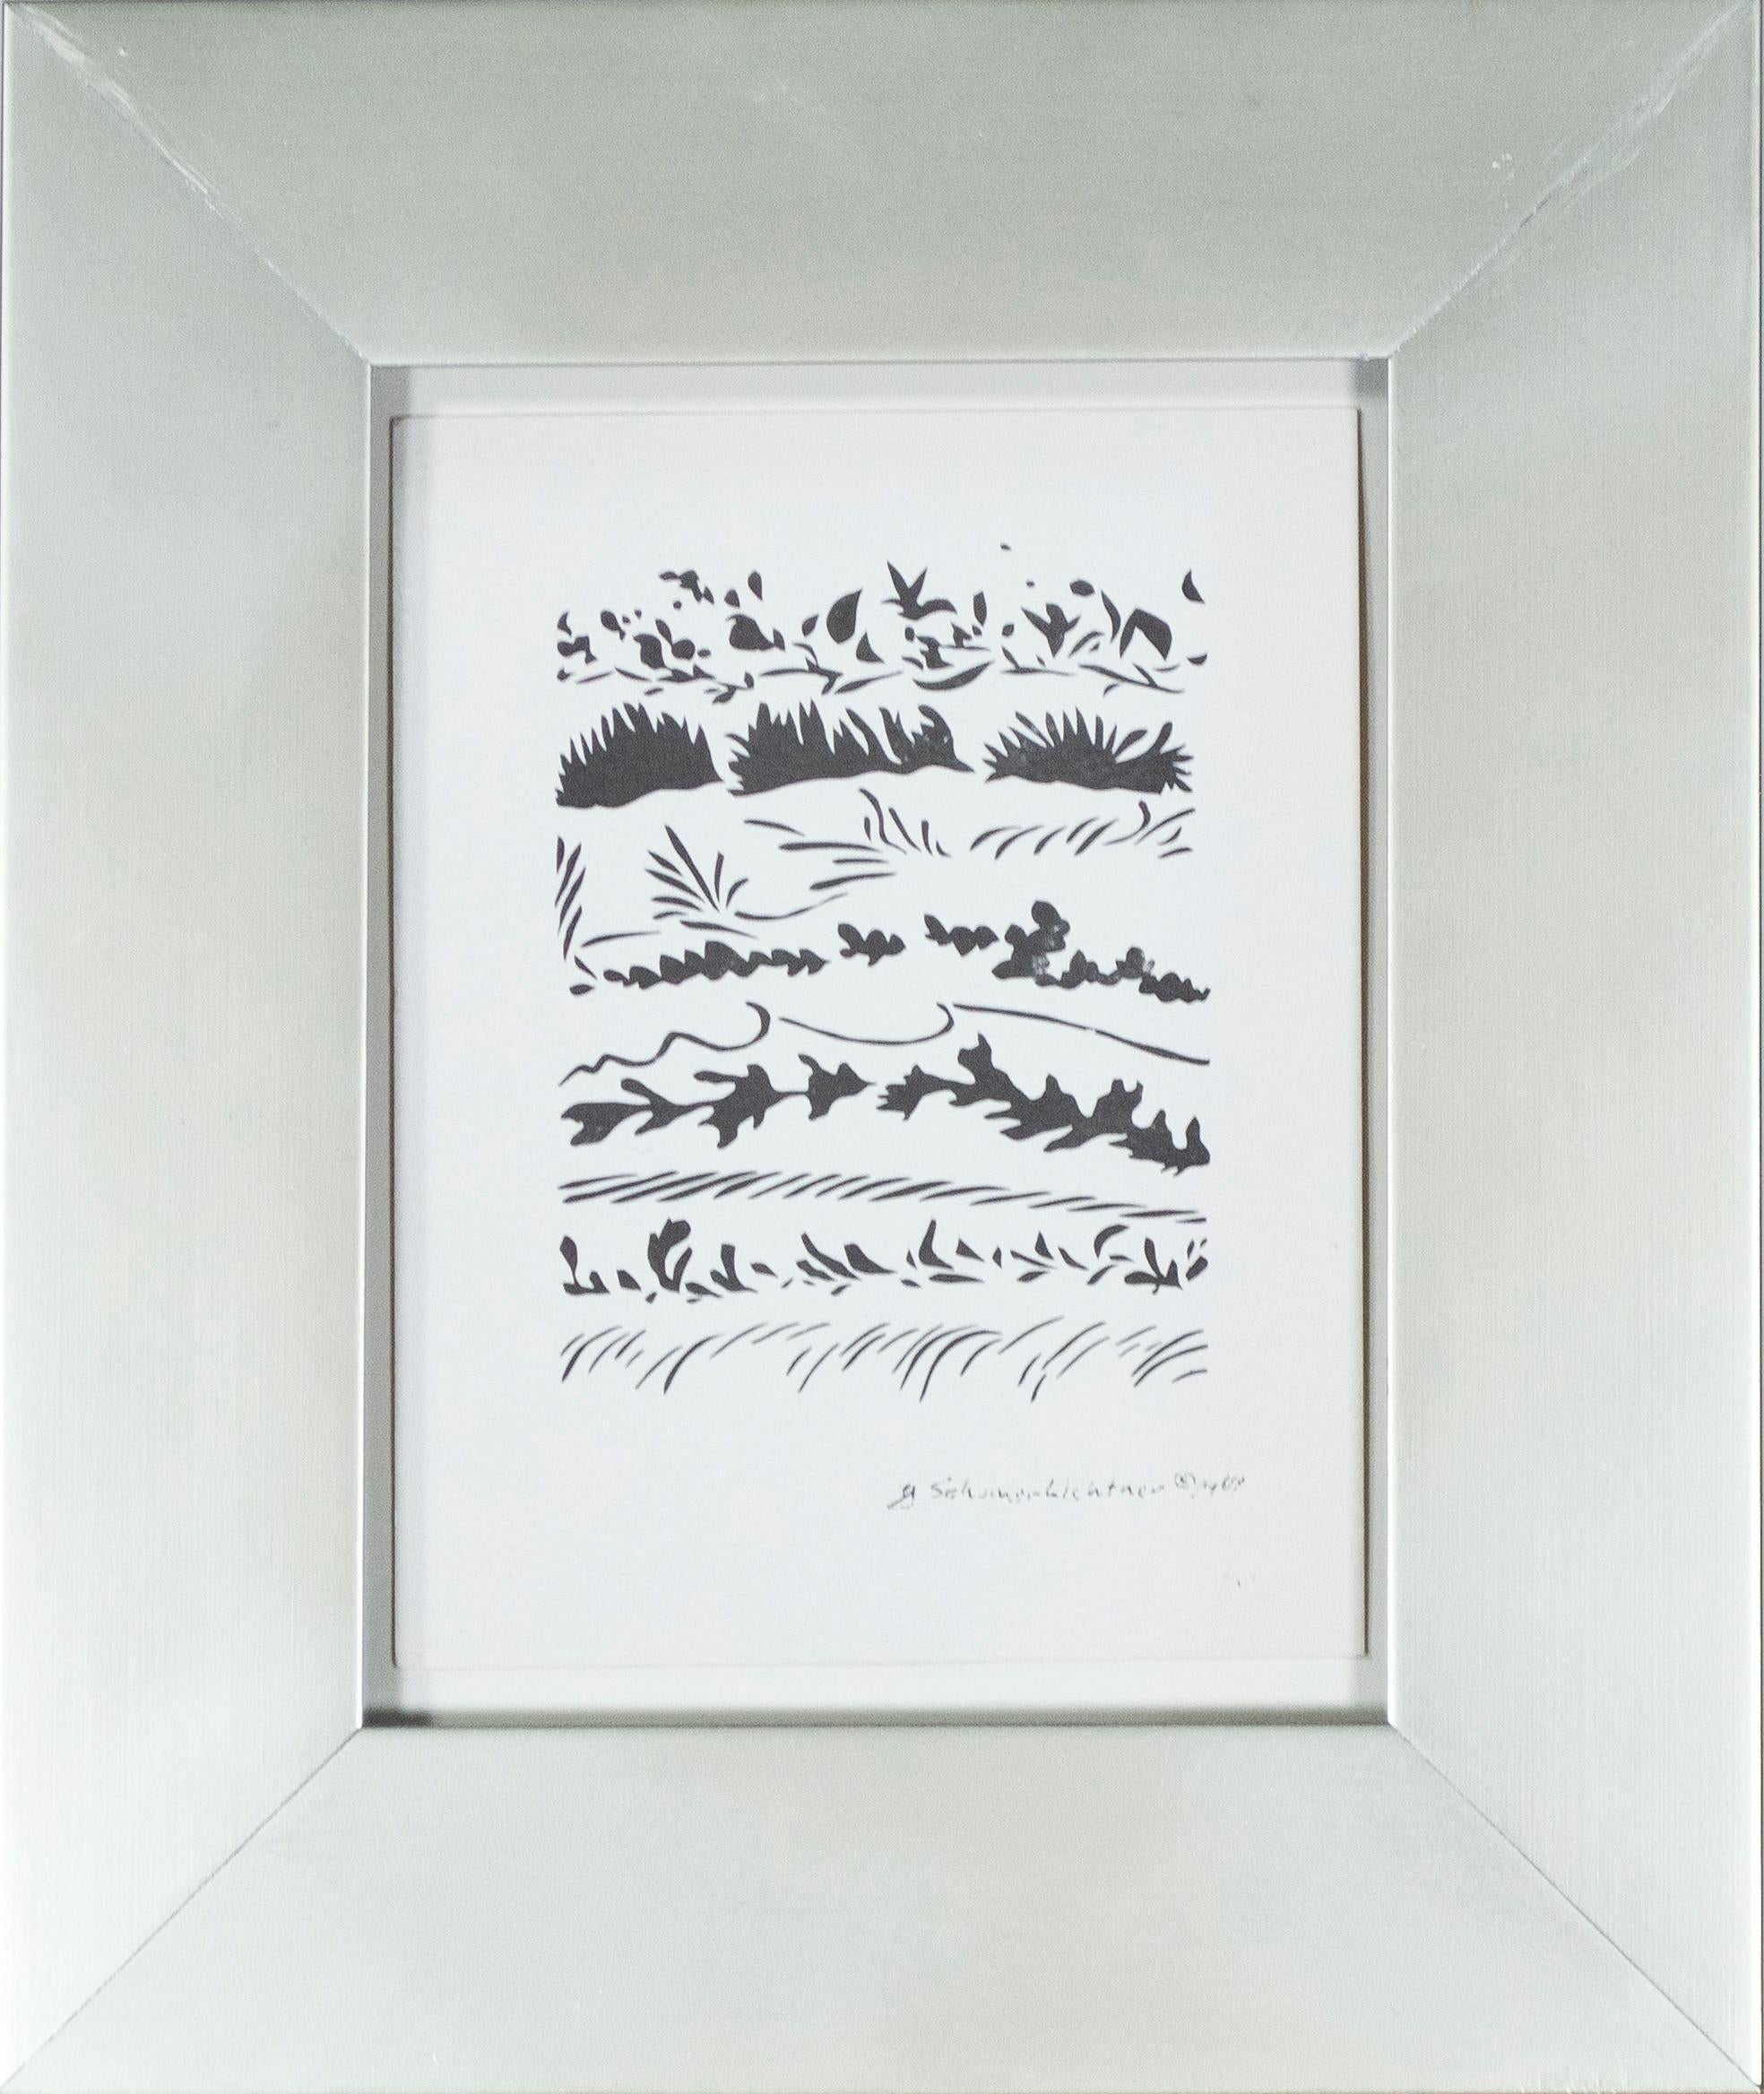 'Winter Silhouettes, ' offset lithograph by Schomer Lichtner